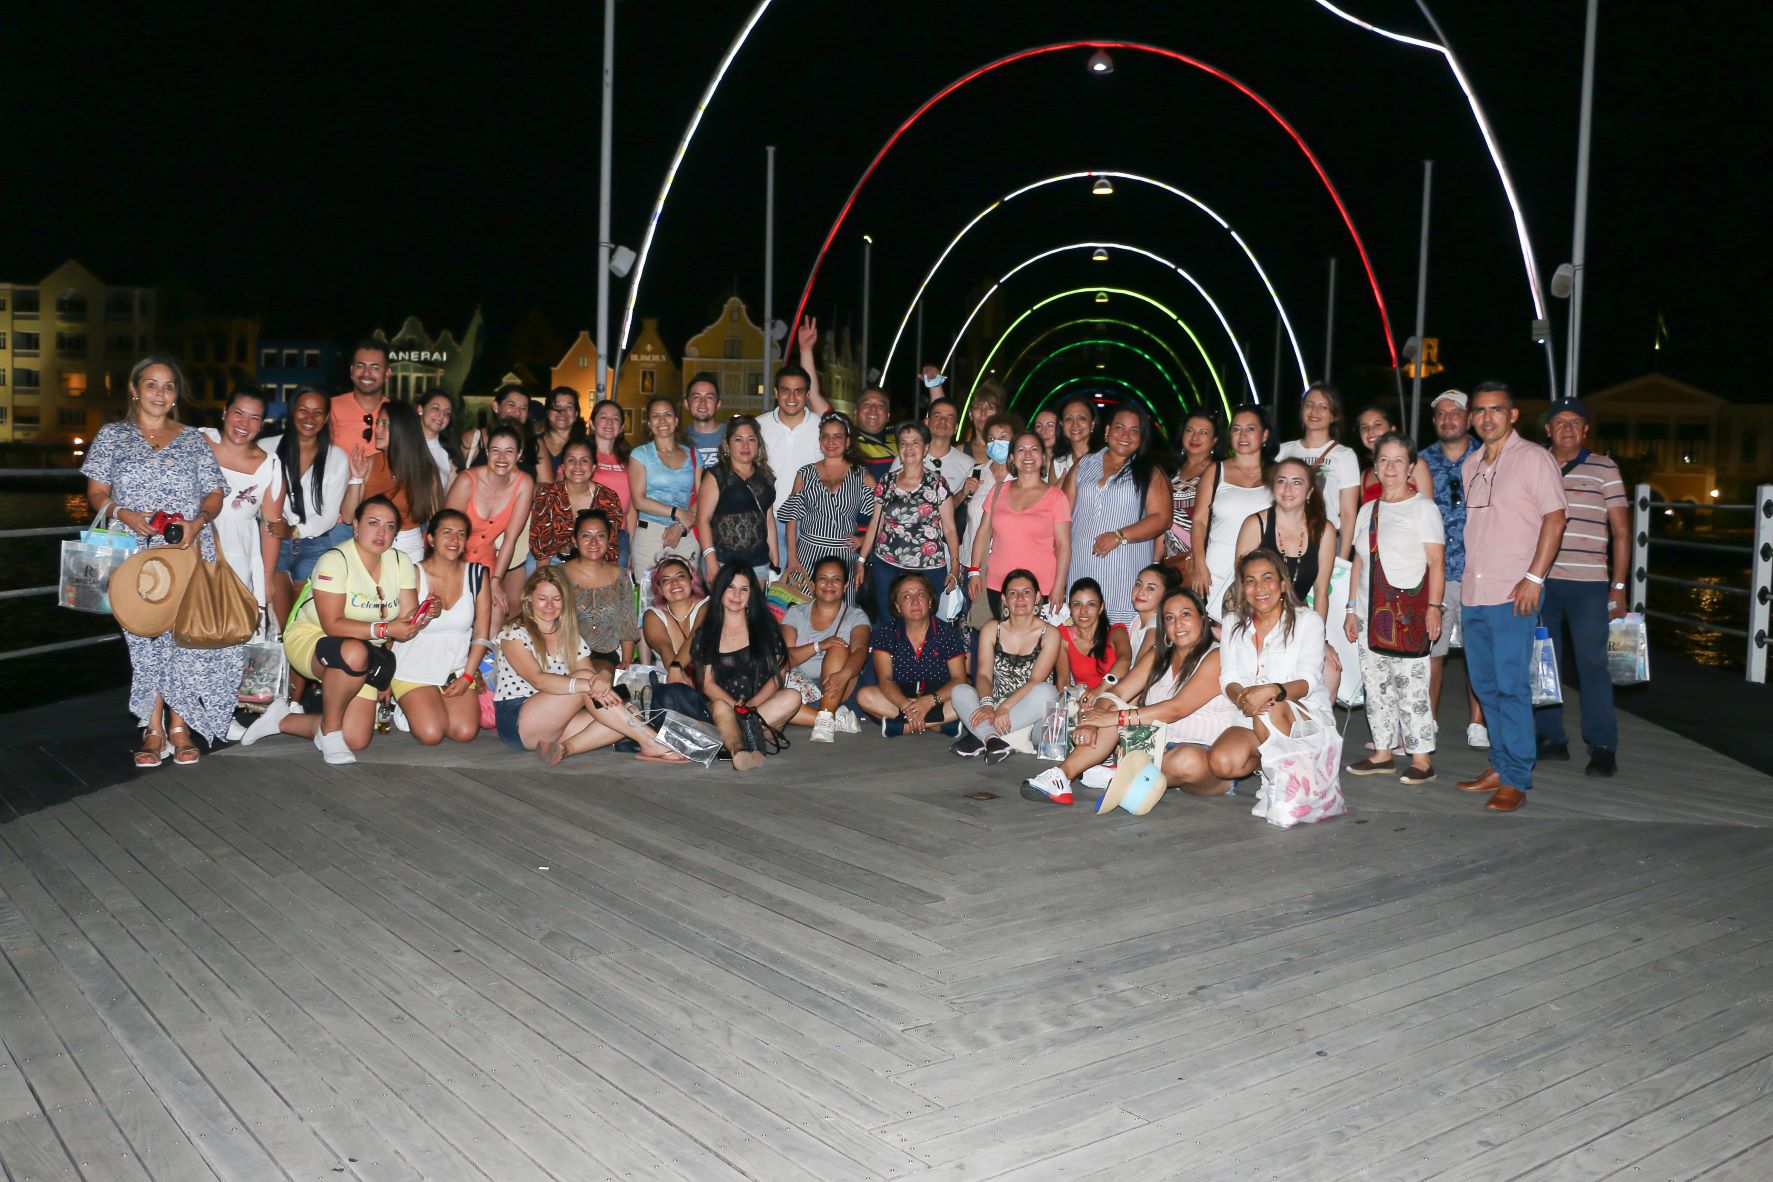 50 travel agents visiting Curaçao from Bogotá, Medellin and Cali